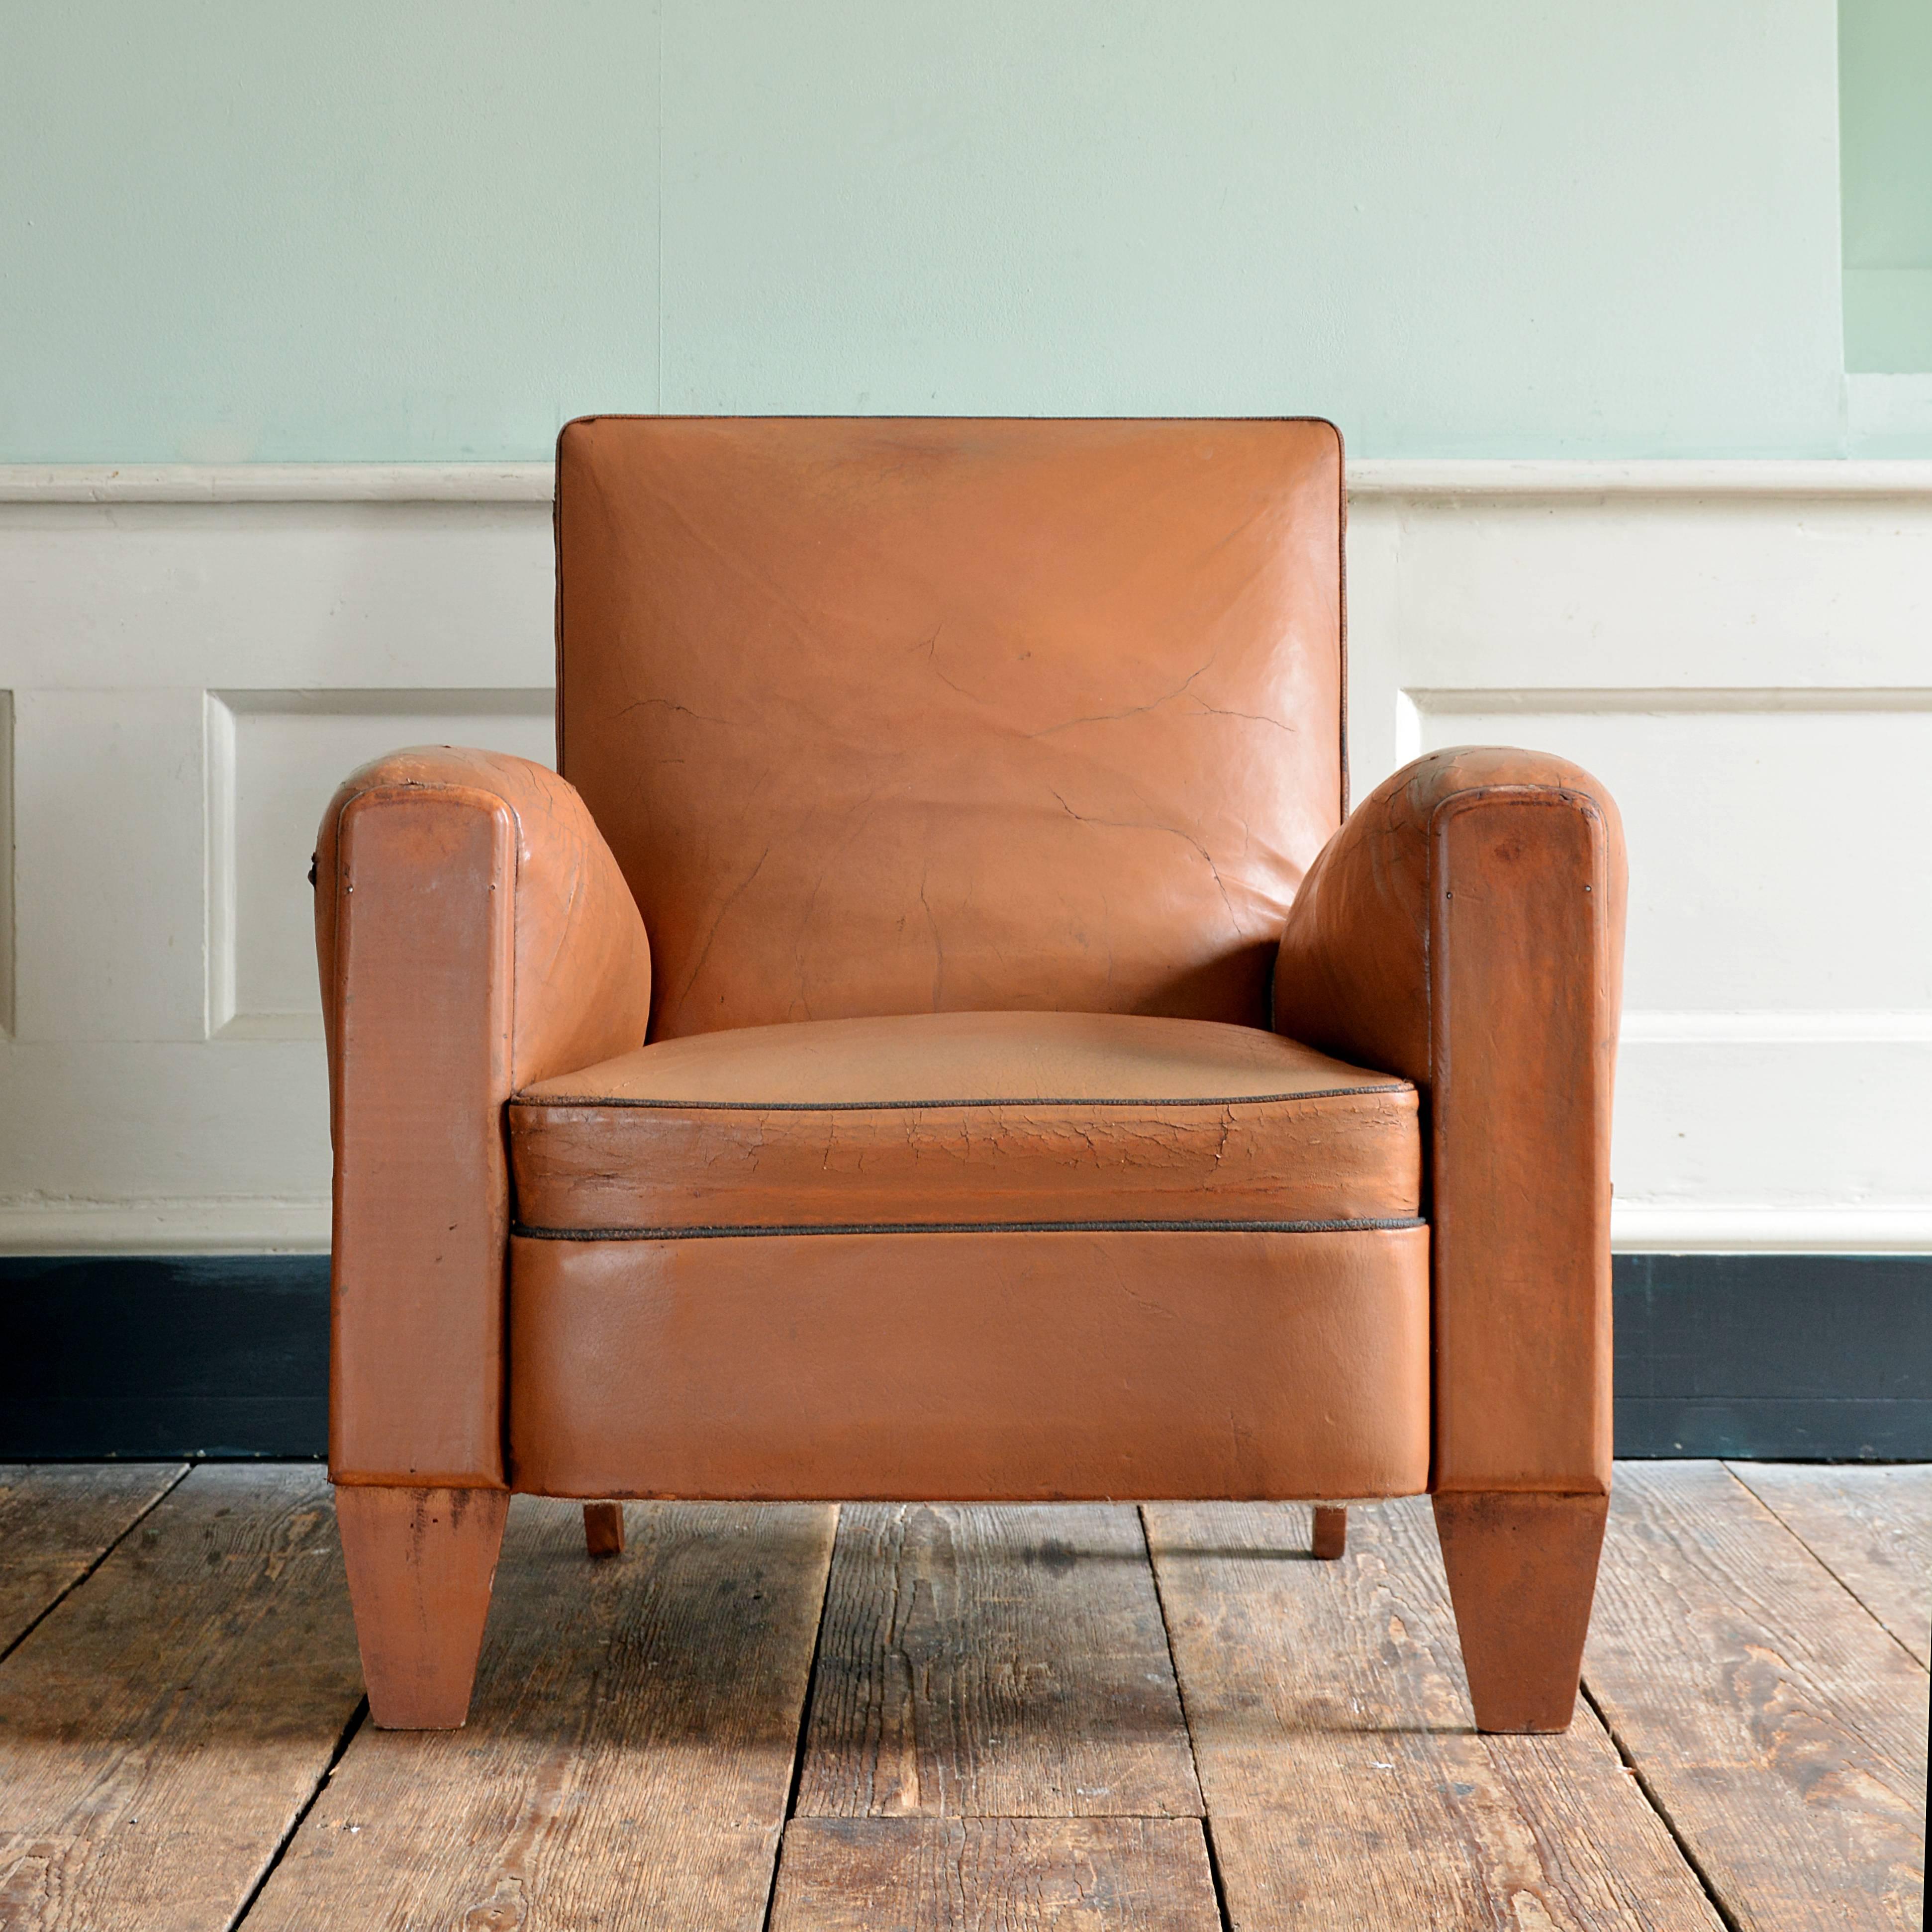 A near pair (front feat slightly different) of French leather upholstered club chairs, circa 1945.

Available to view at Brunswick House, London.

Dimensions: 82cm (32¼